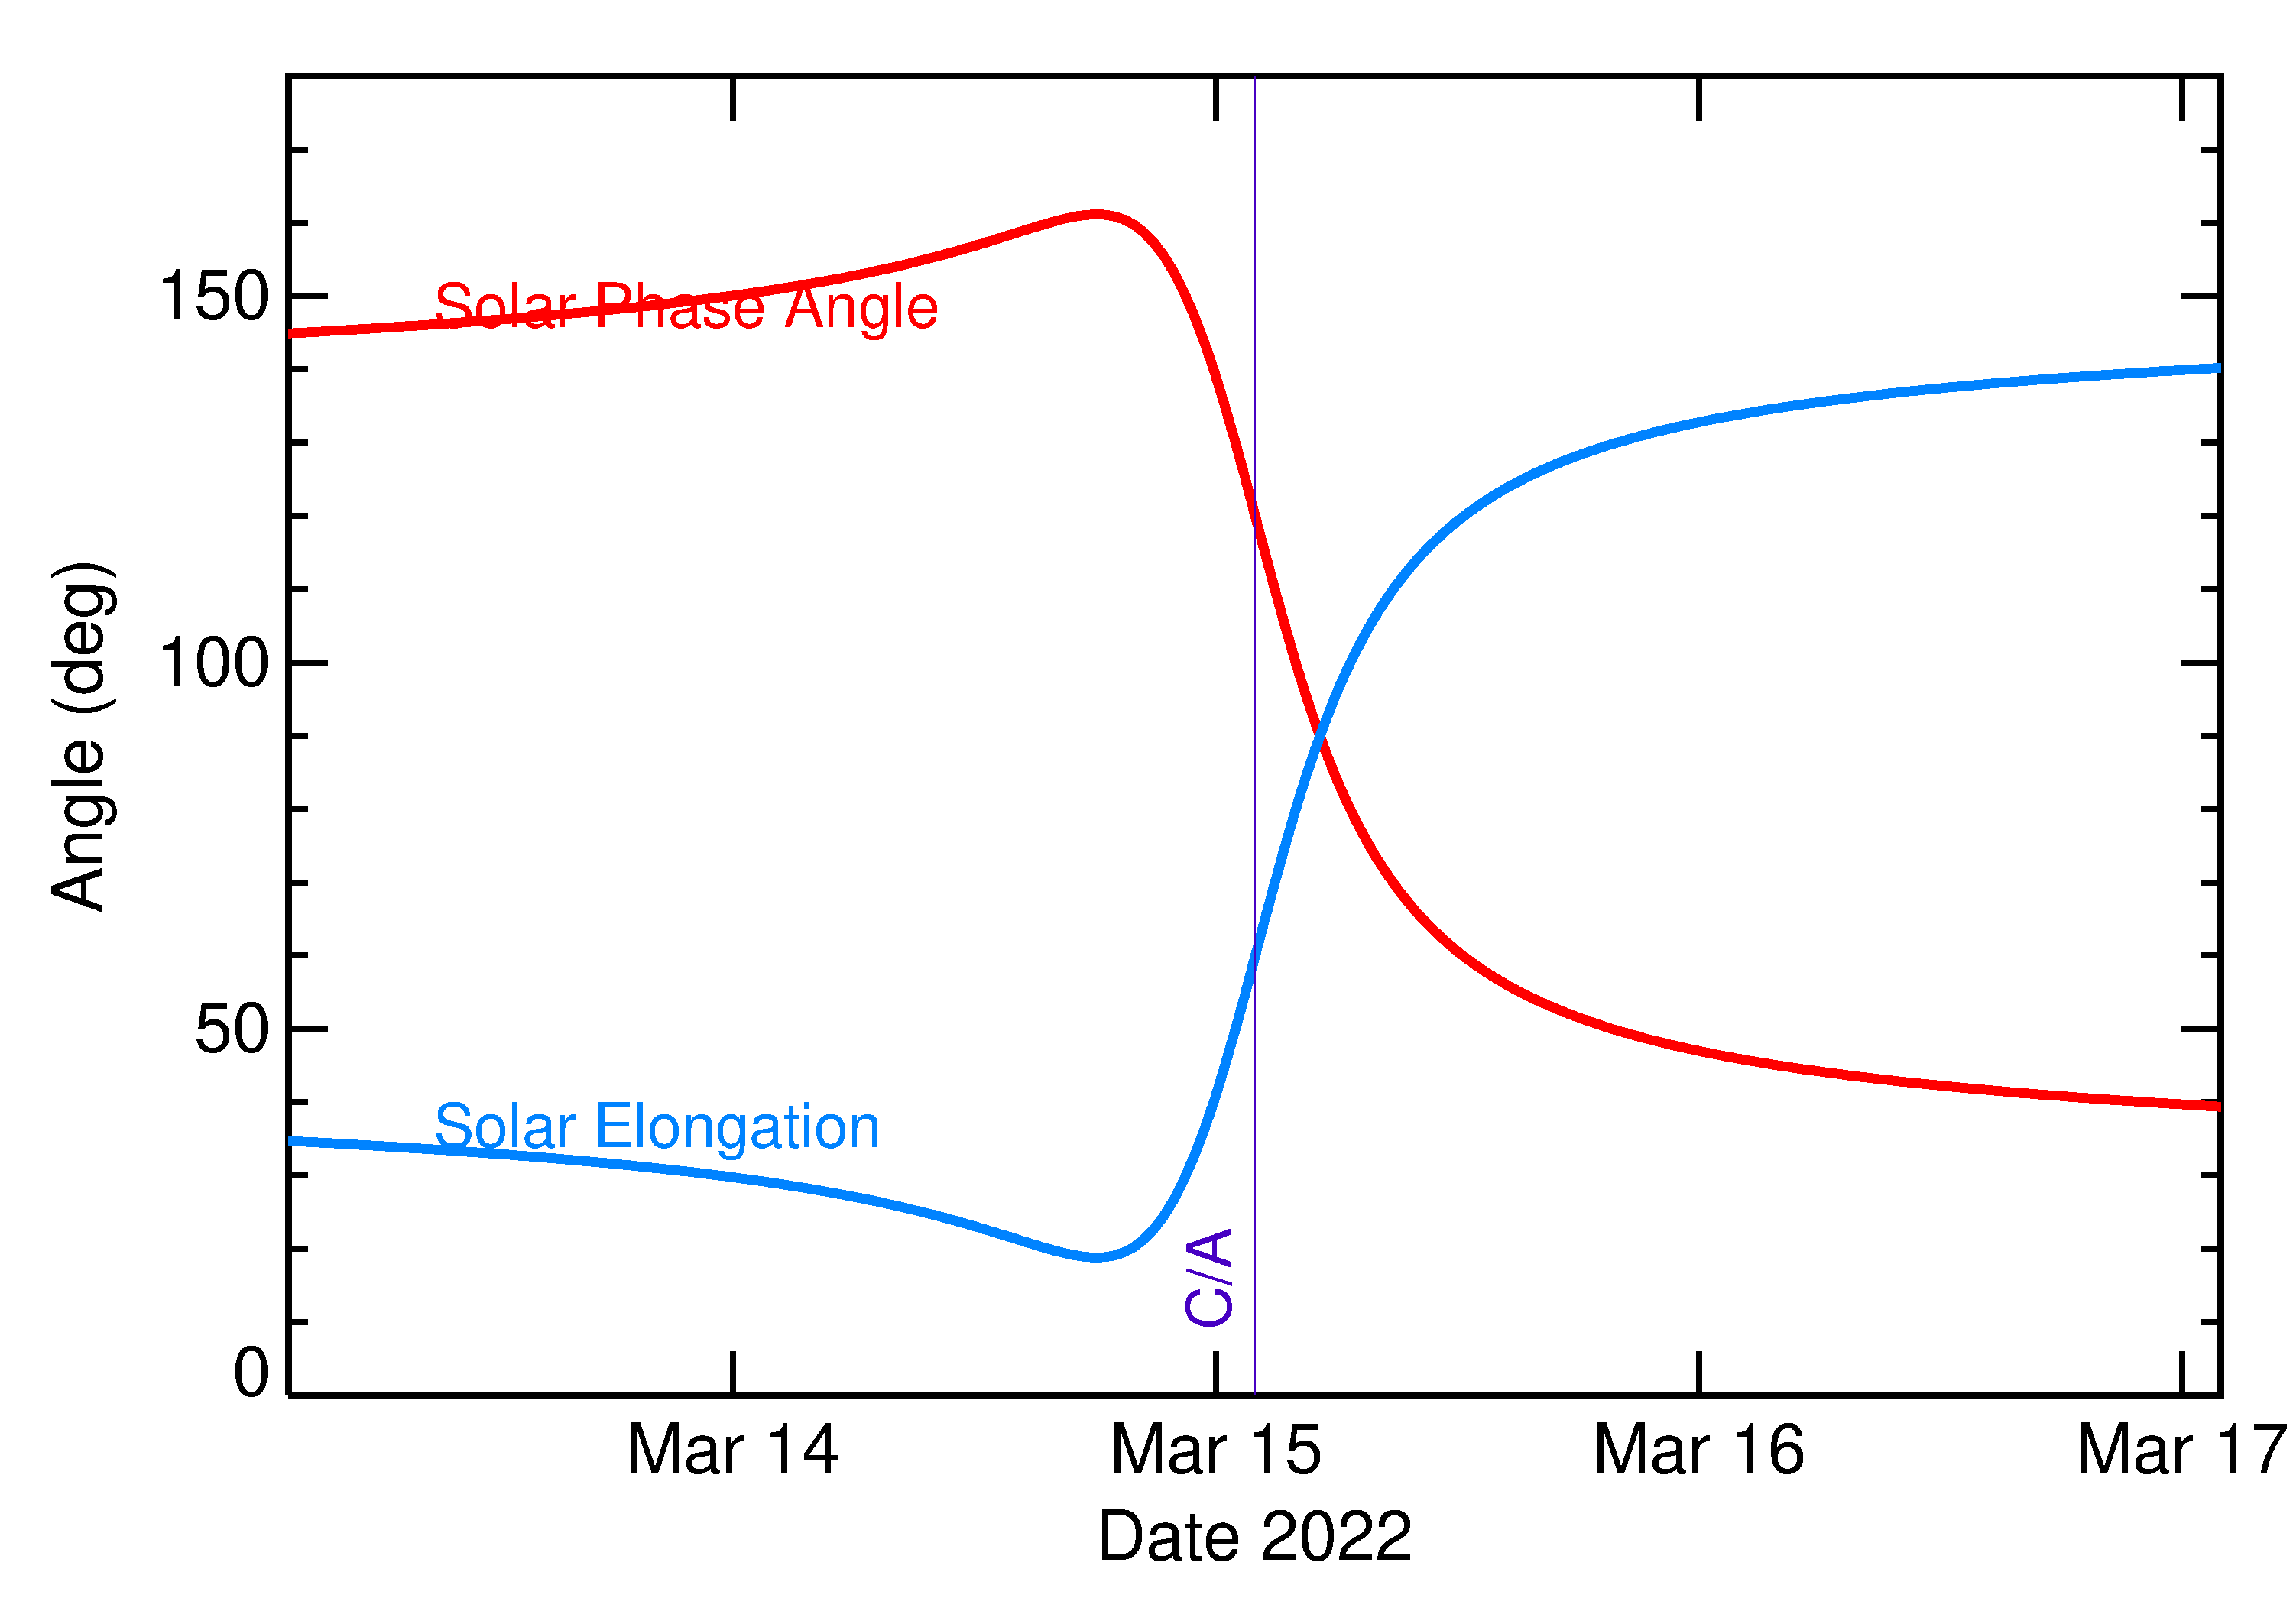 Solar Elongation and Solar Phase Angle of 2022 FA in the days around closest approach